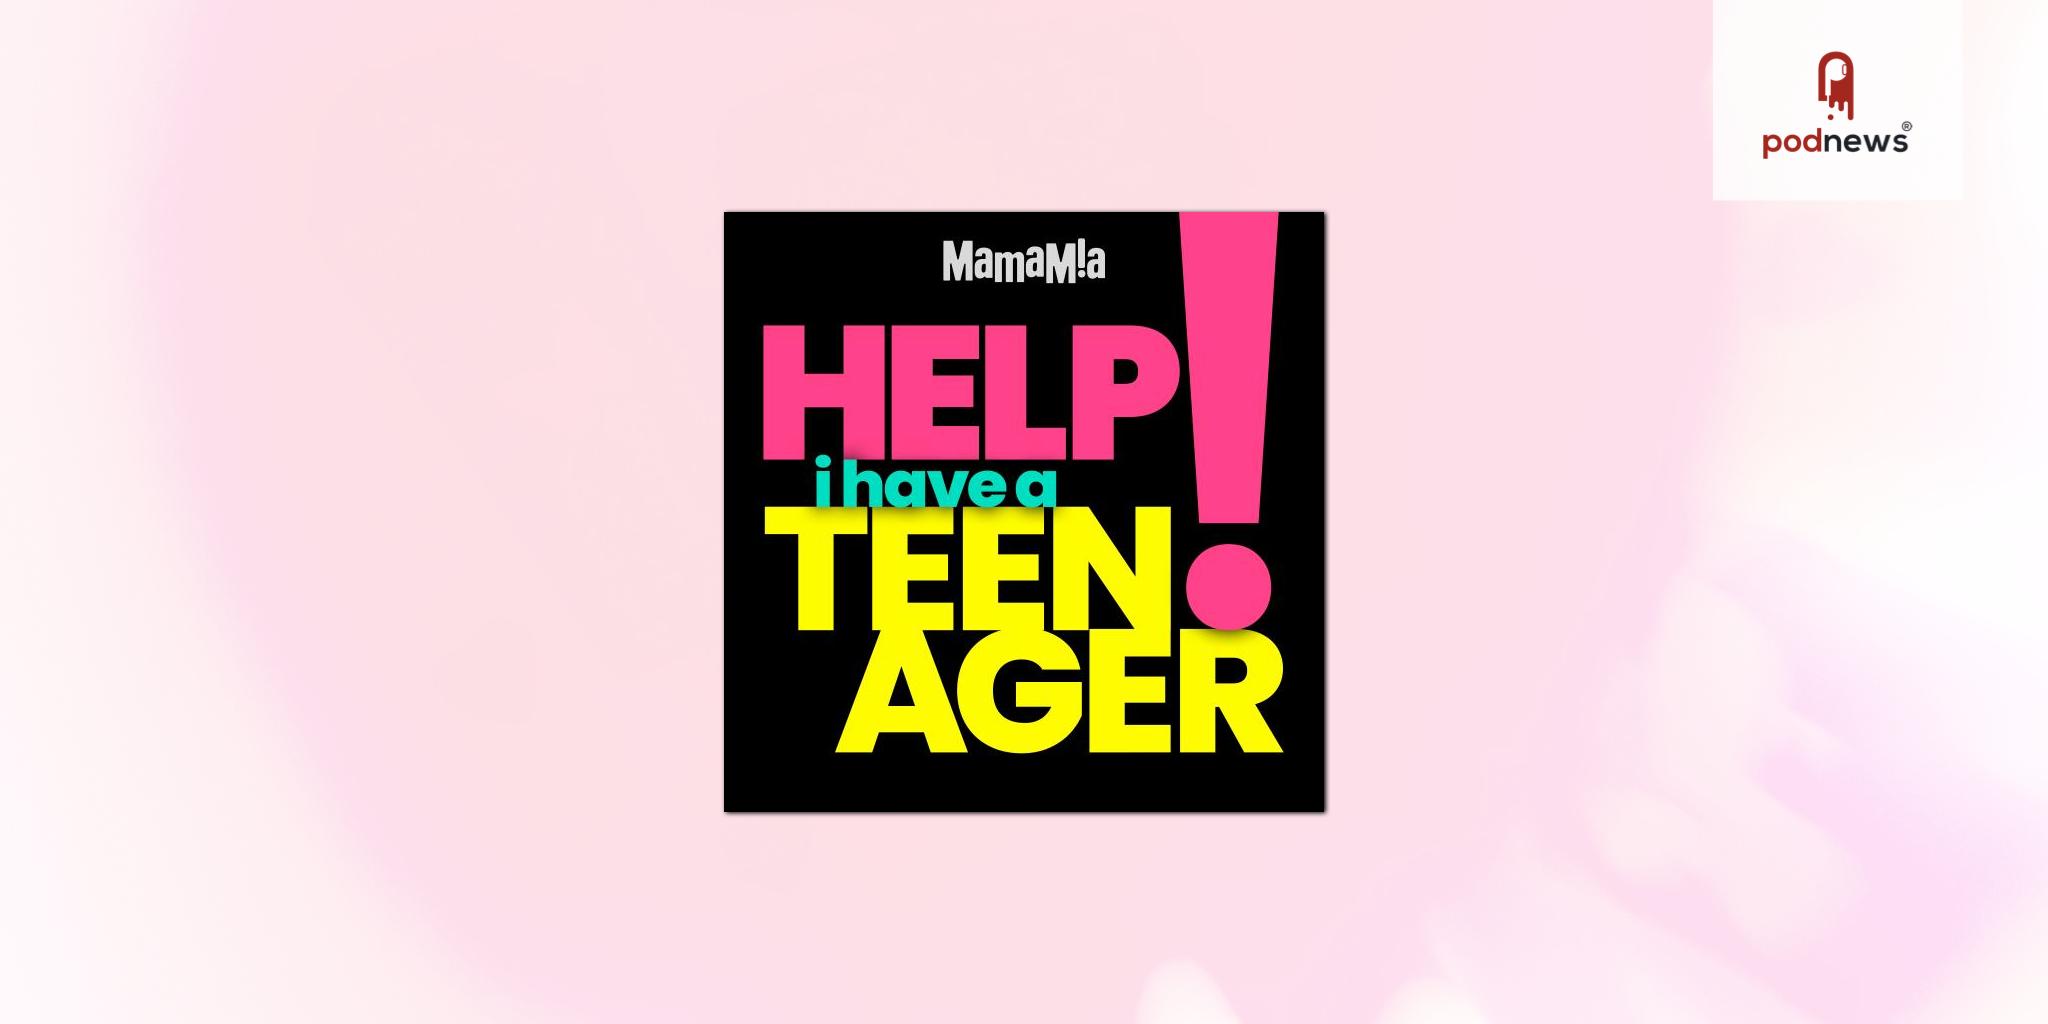 Have a teenager? Mamamia’s latest podcast is here to help.